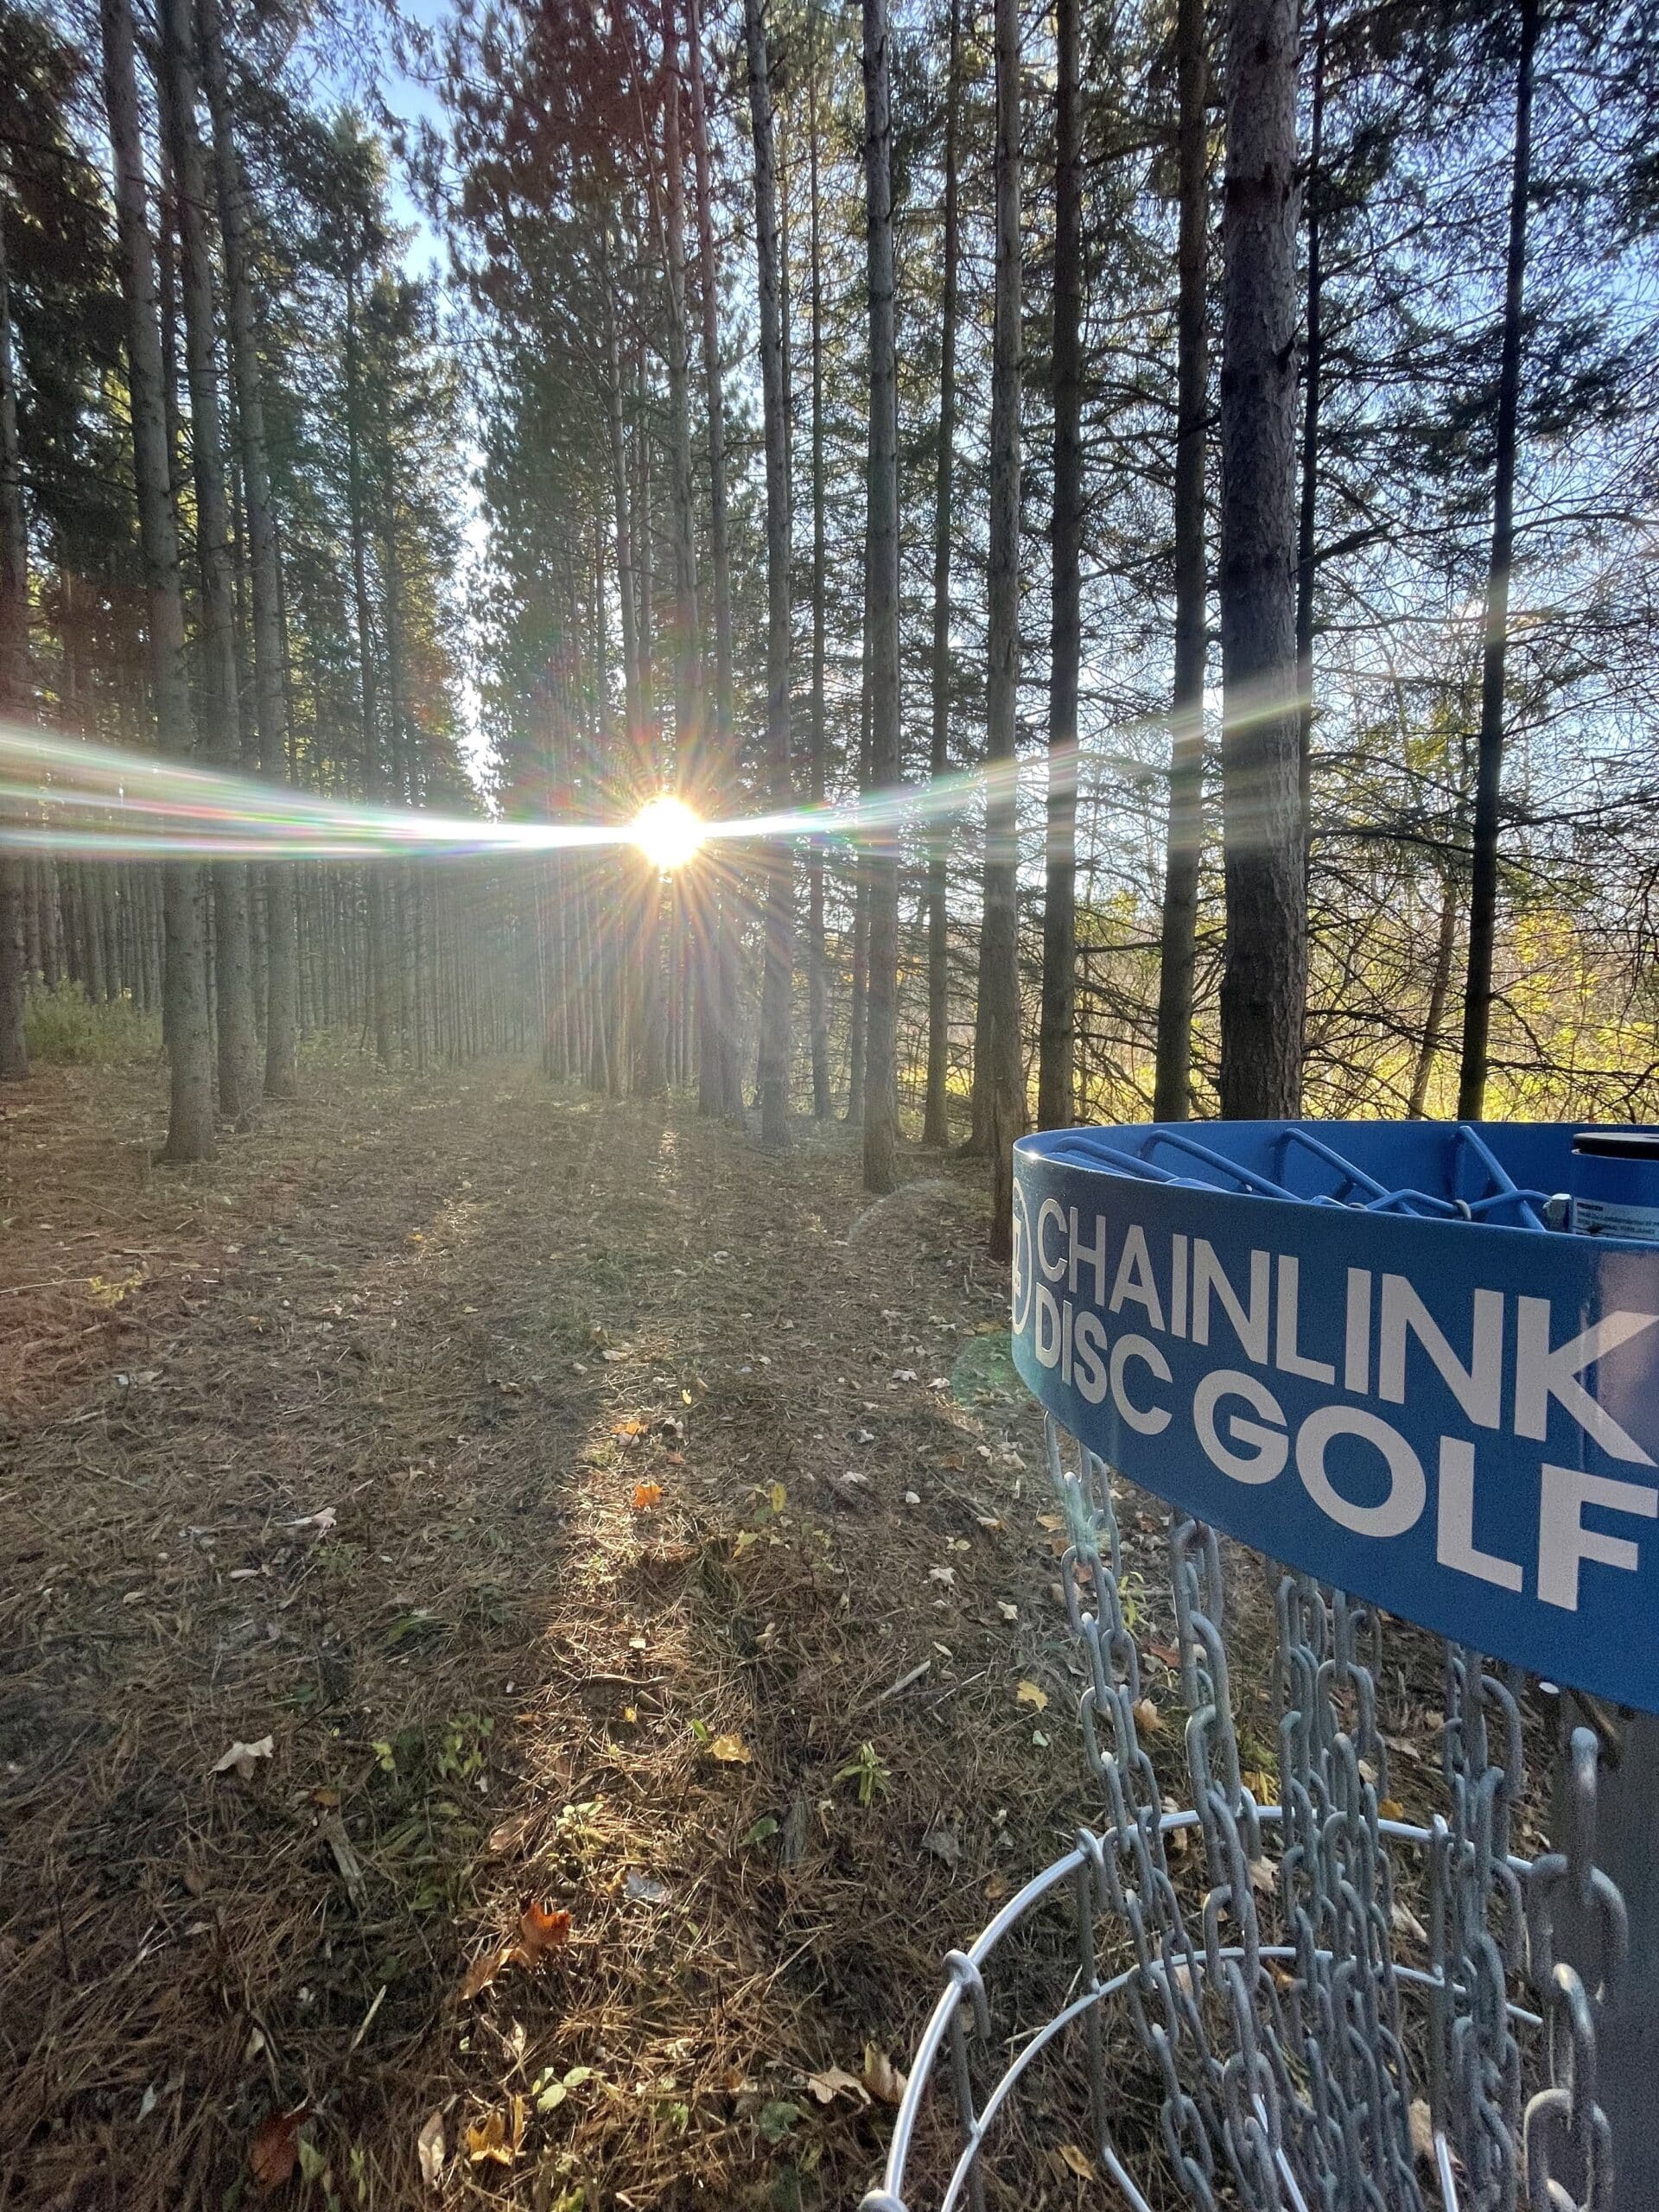 hole 17 at albion hills looking back through pine plantation photo credit jeff mackeigan